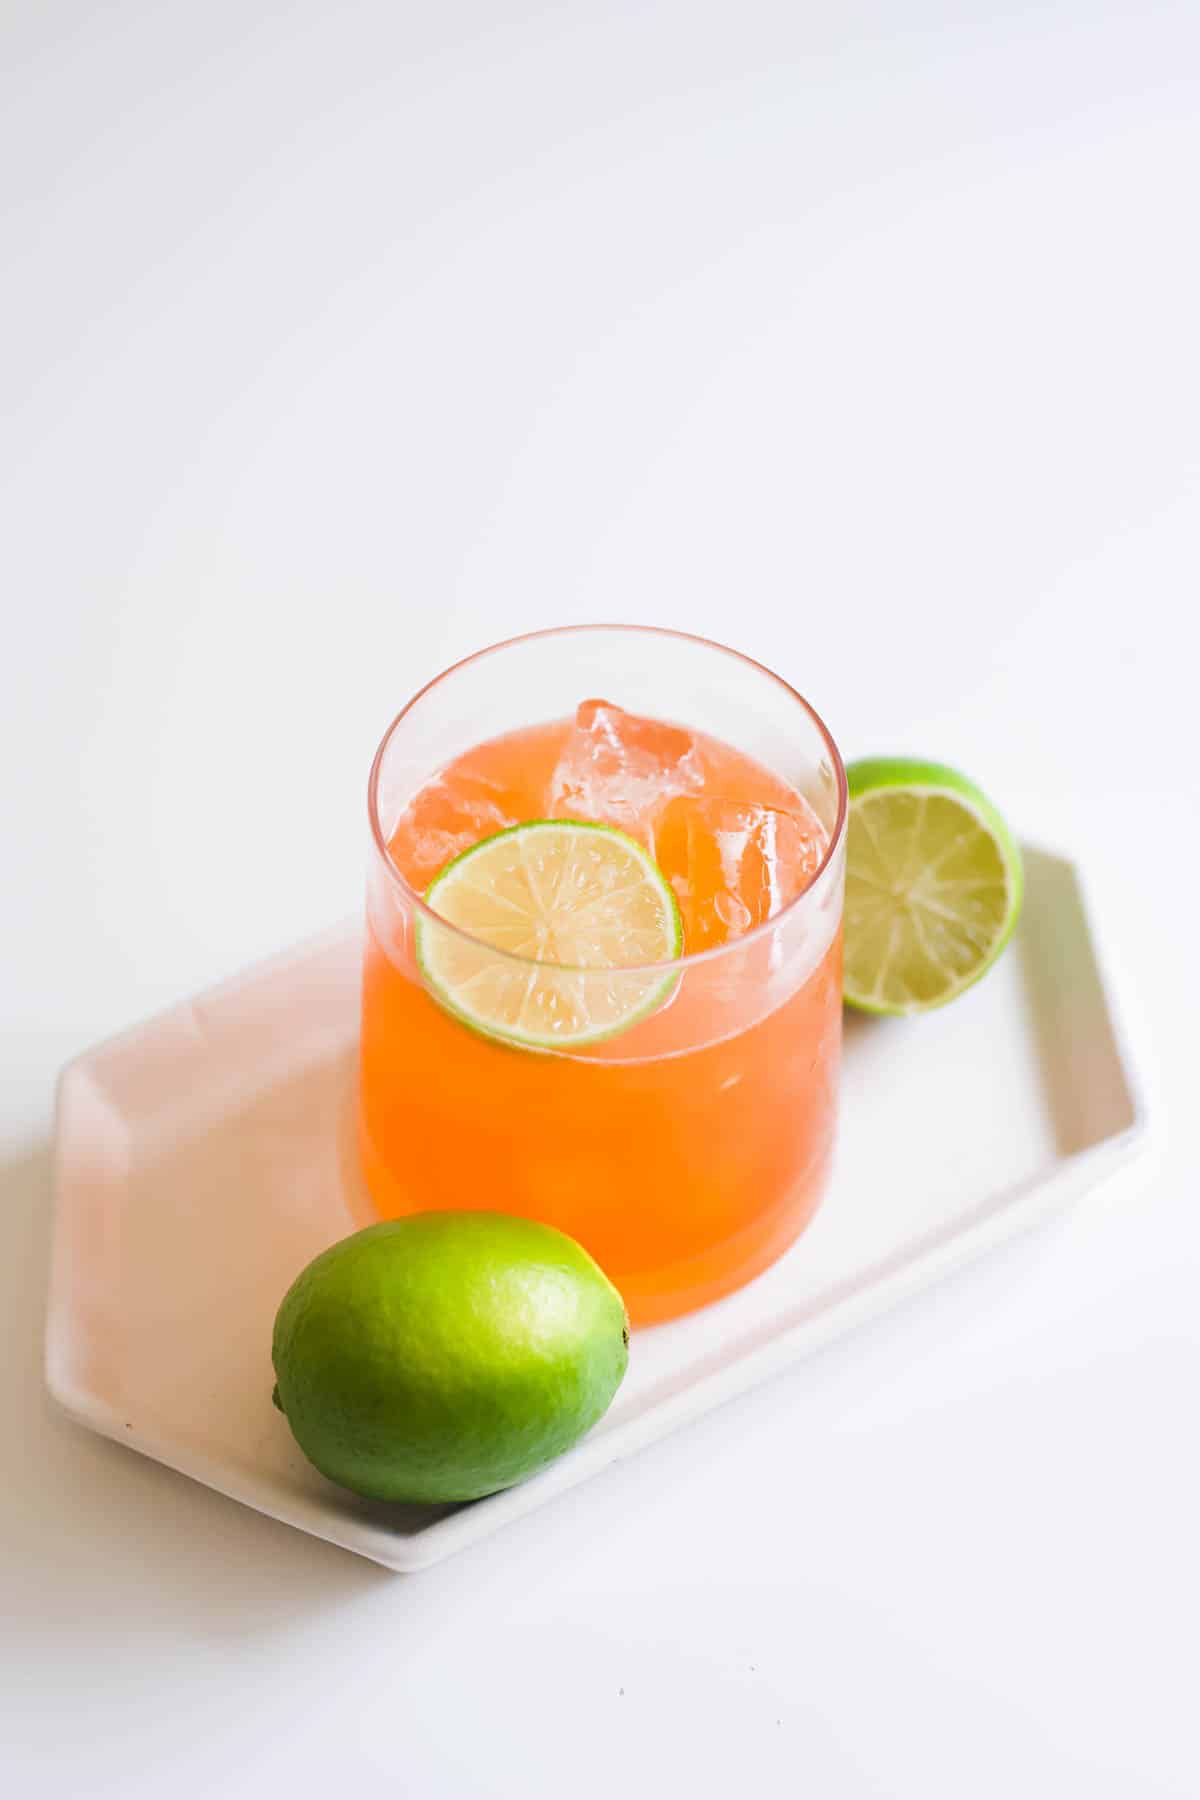 Spiced rum Aperol cocktail in a glass surrounded by limes on top of a small white plate.